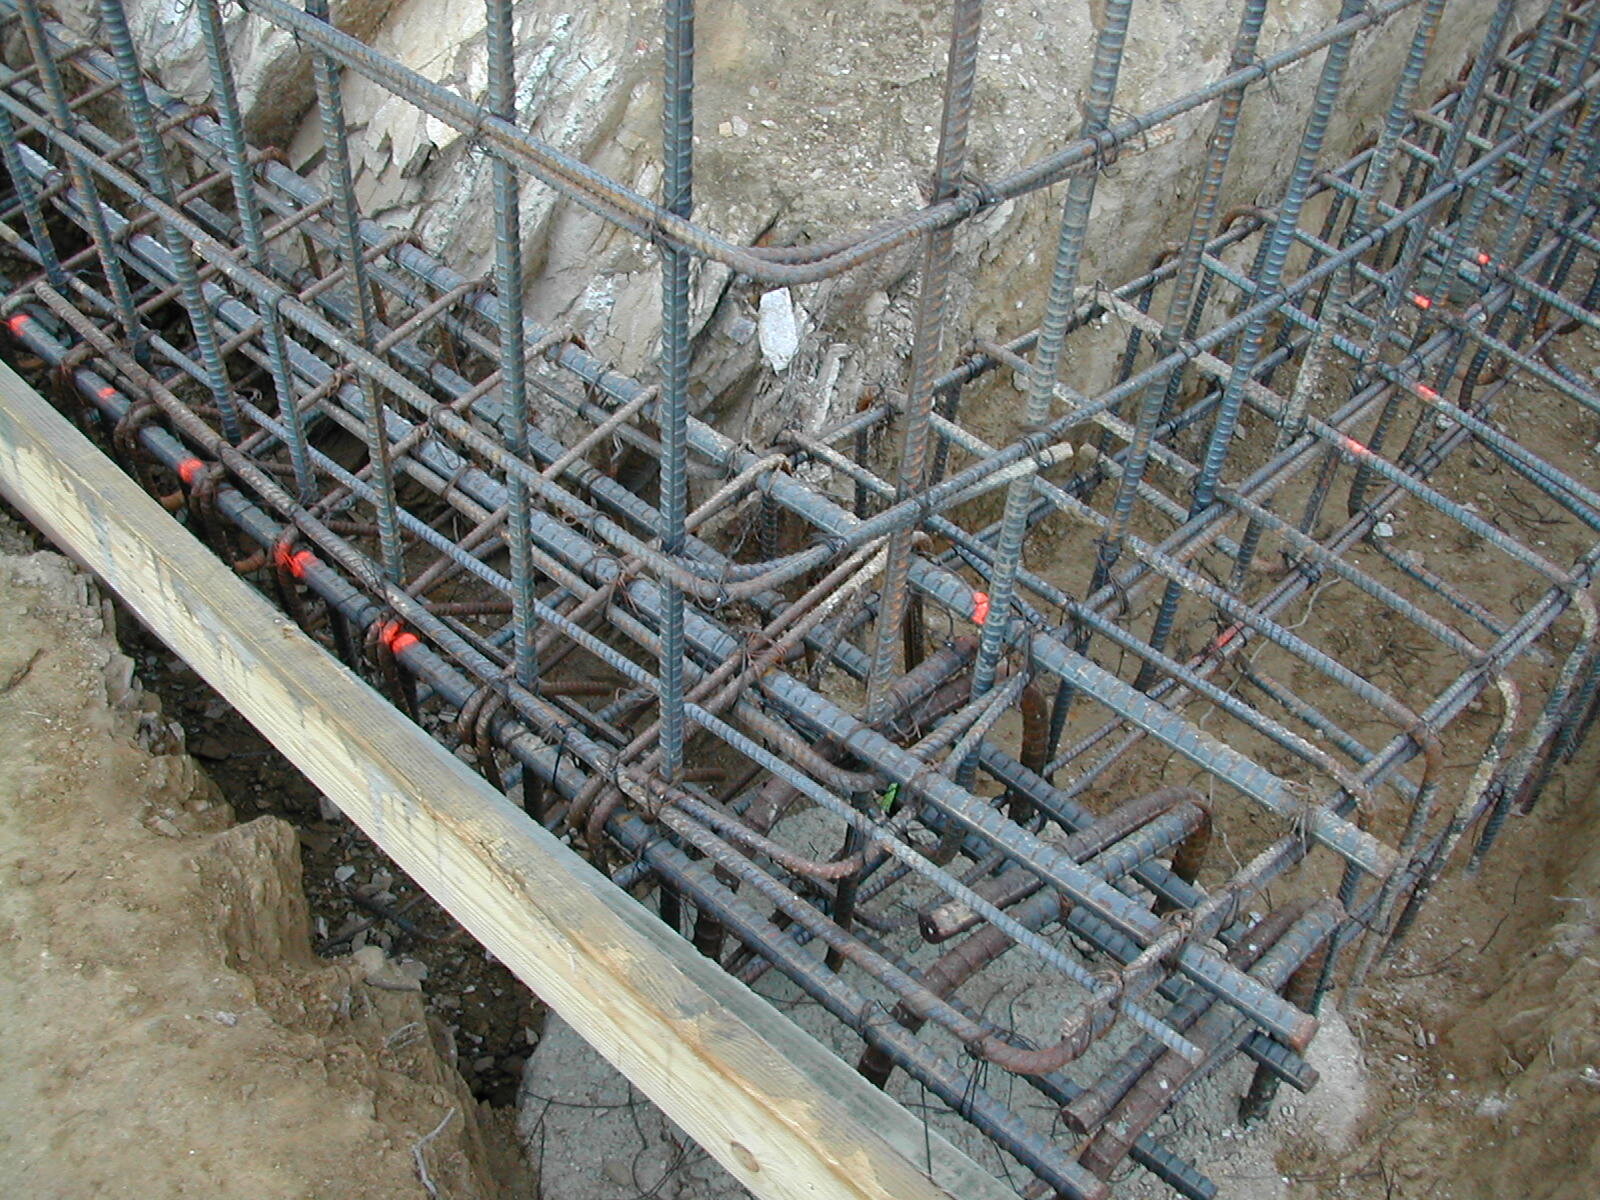  As the concrete slab formwork and rebar is set for the cantilevered floor we get new perspectives on the site. We have more than three times the weight in rebar steel than we do in the steel columns and beams. 